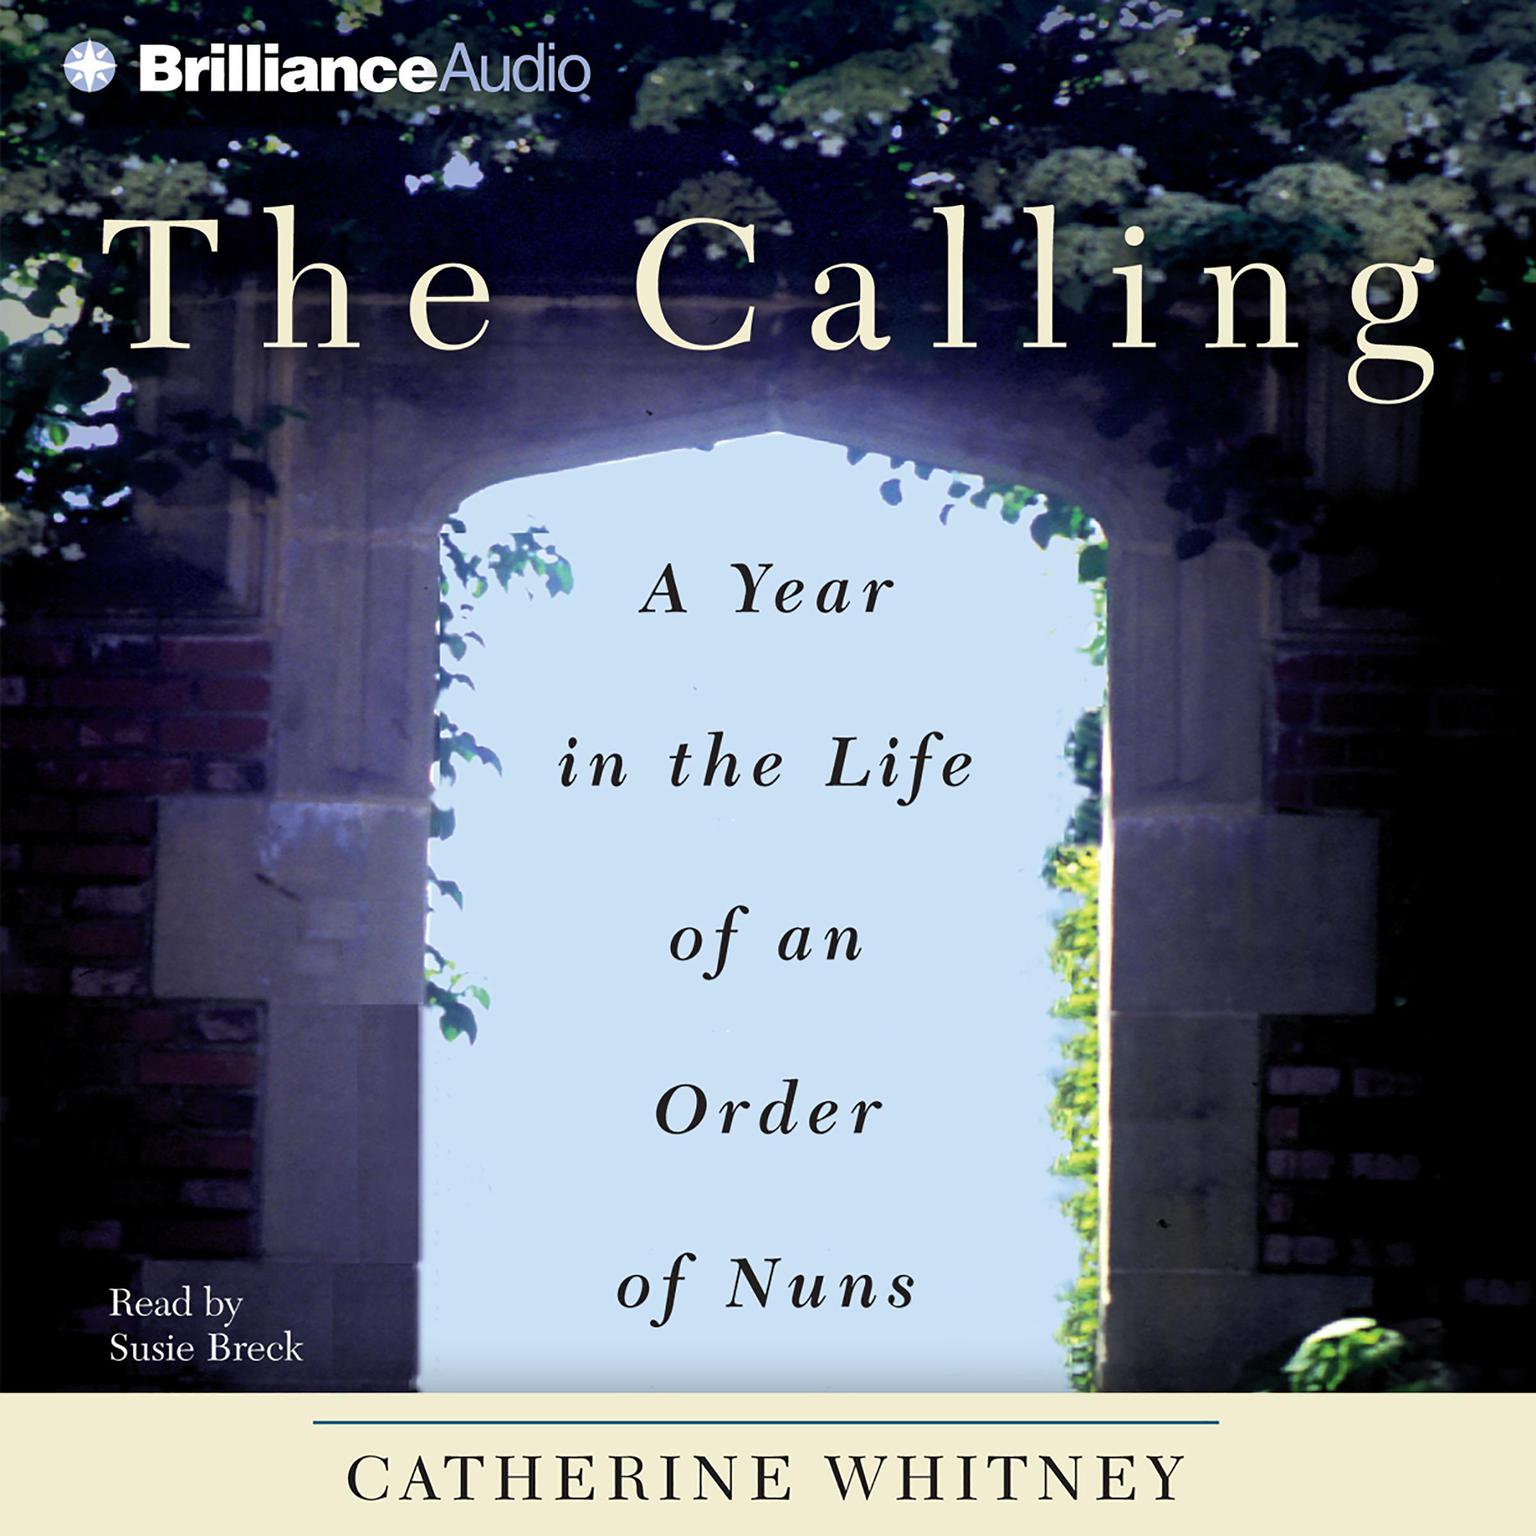 The Calling (Abridged): A Year in the Life of an Order of Nuns Audiobook, by Catherine Whitney